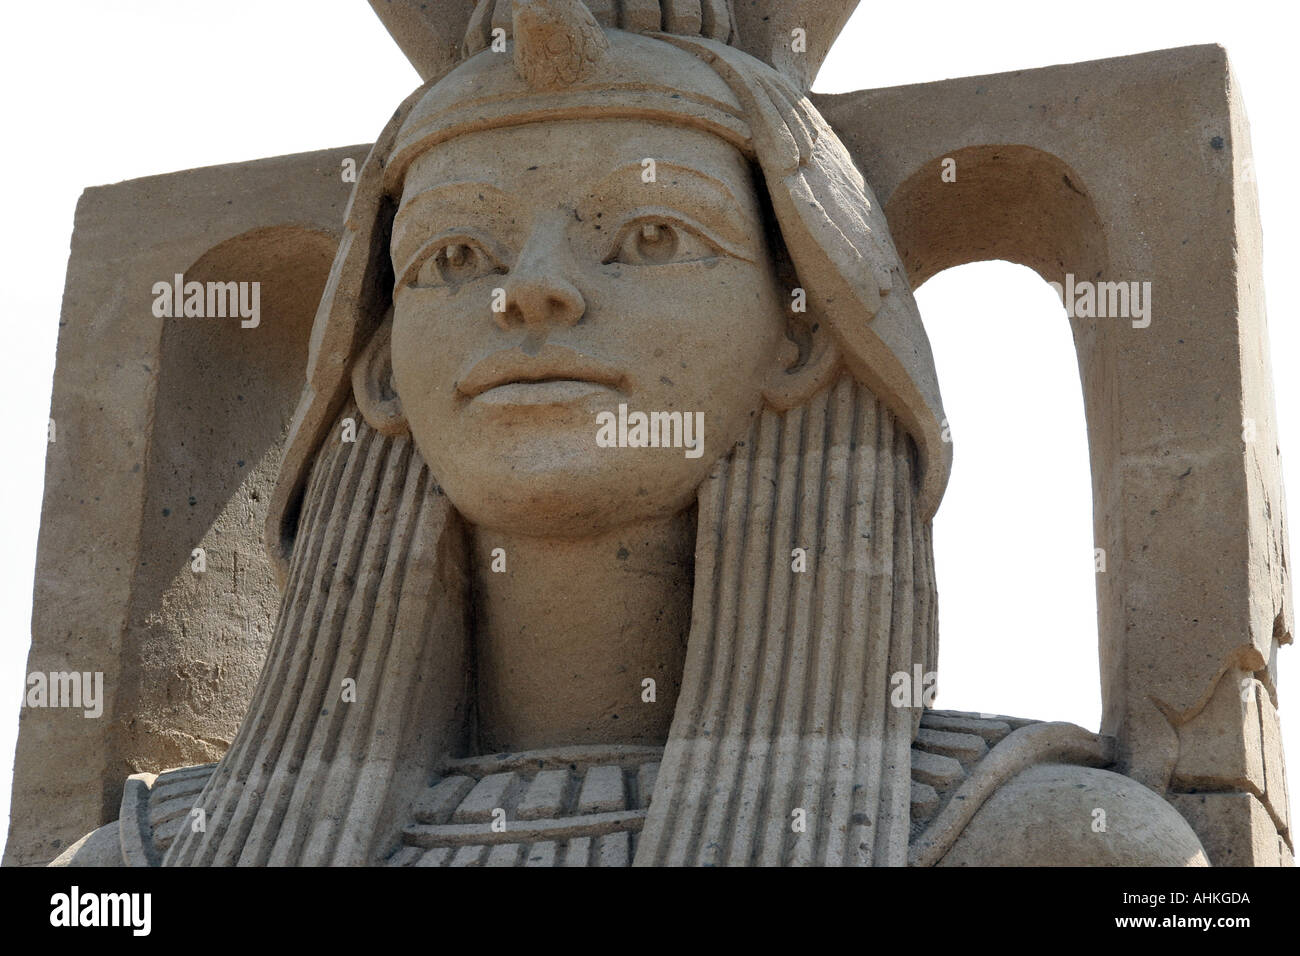 Sand sculpture of an egyptian pharaoh at the world sand sculpting ...